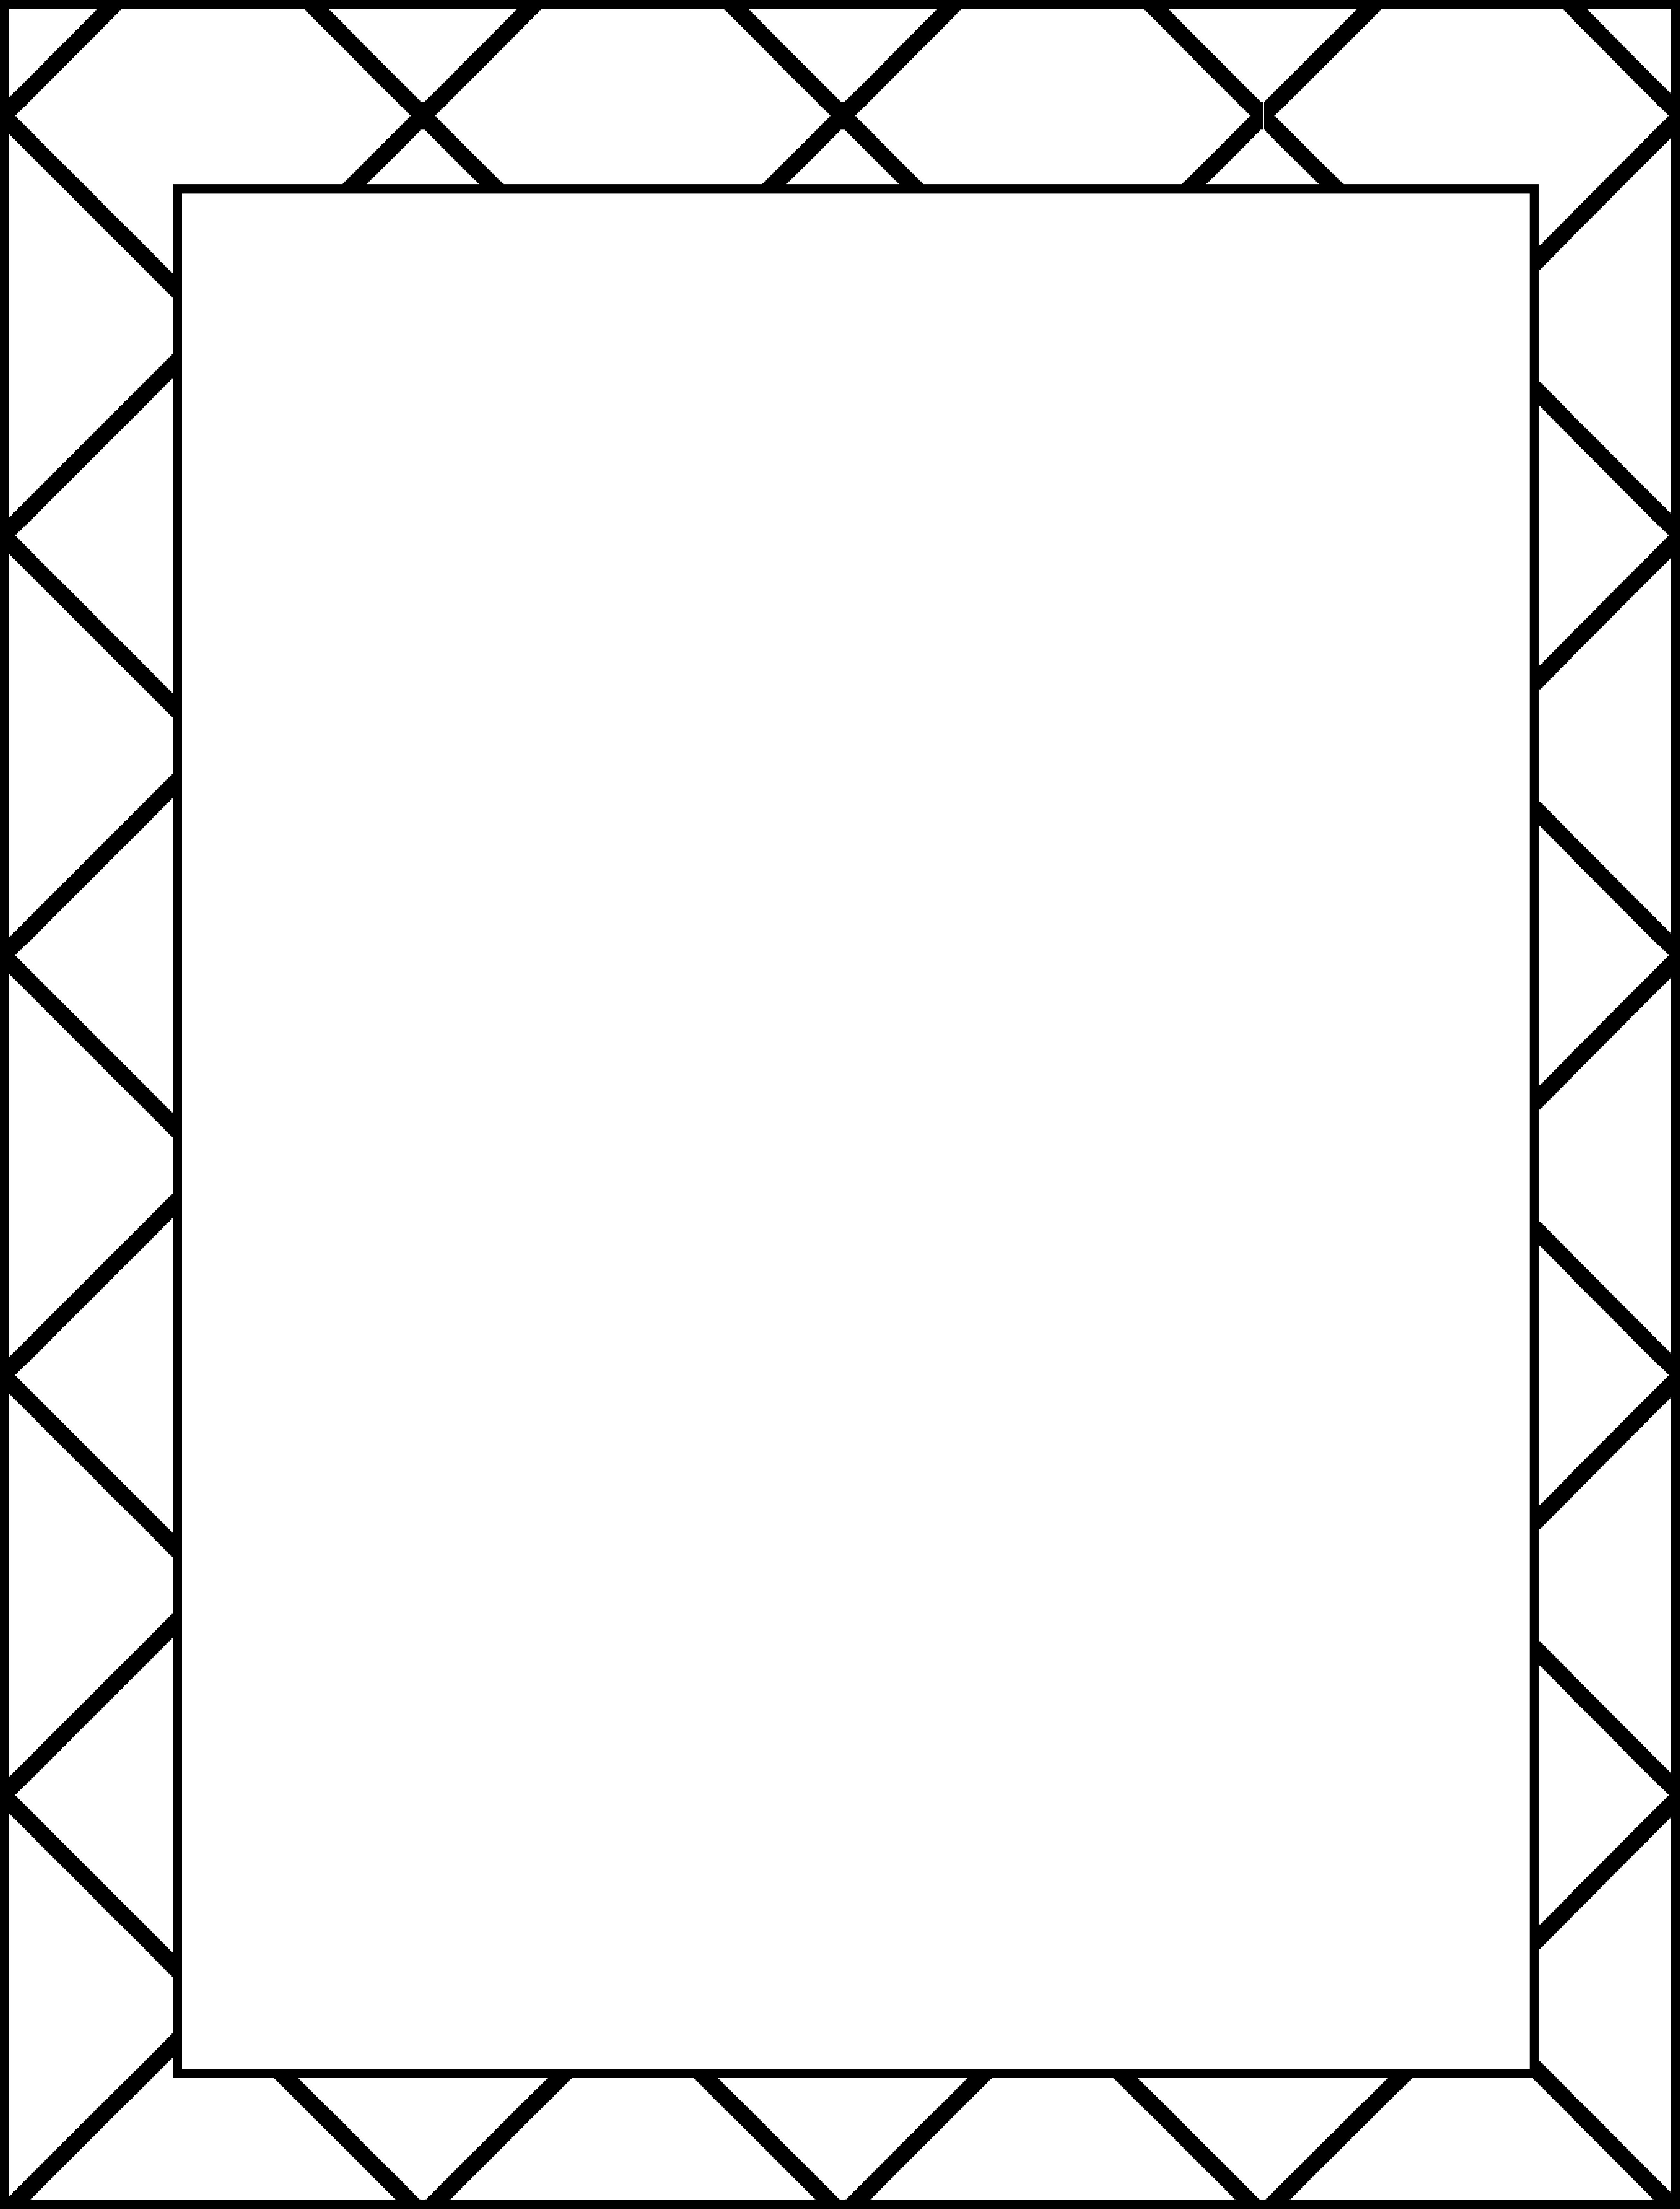 simple-border-designs-for-school-projects-to-draw-free-download-on